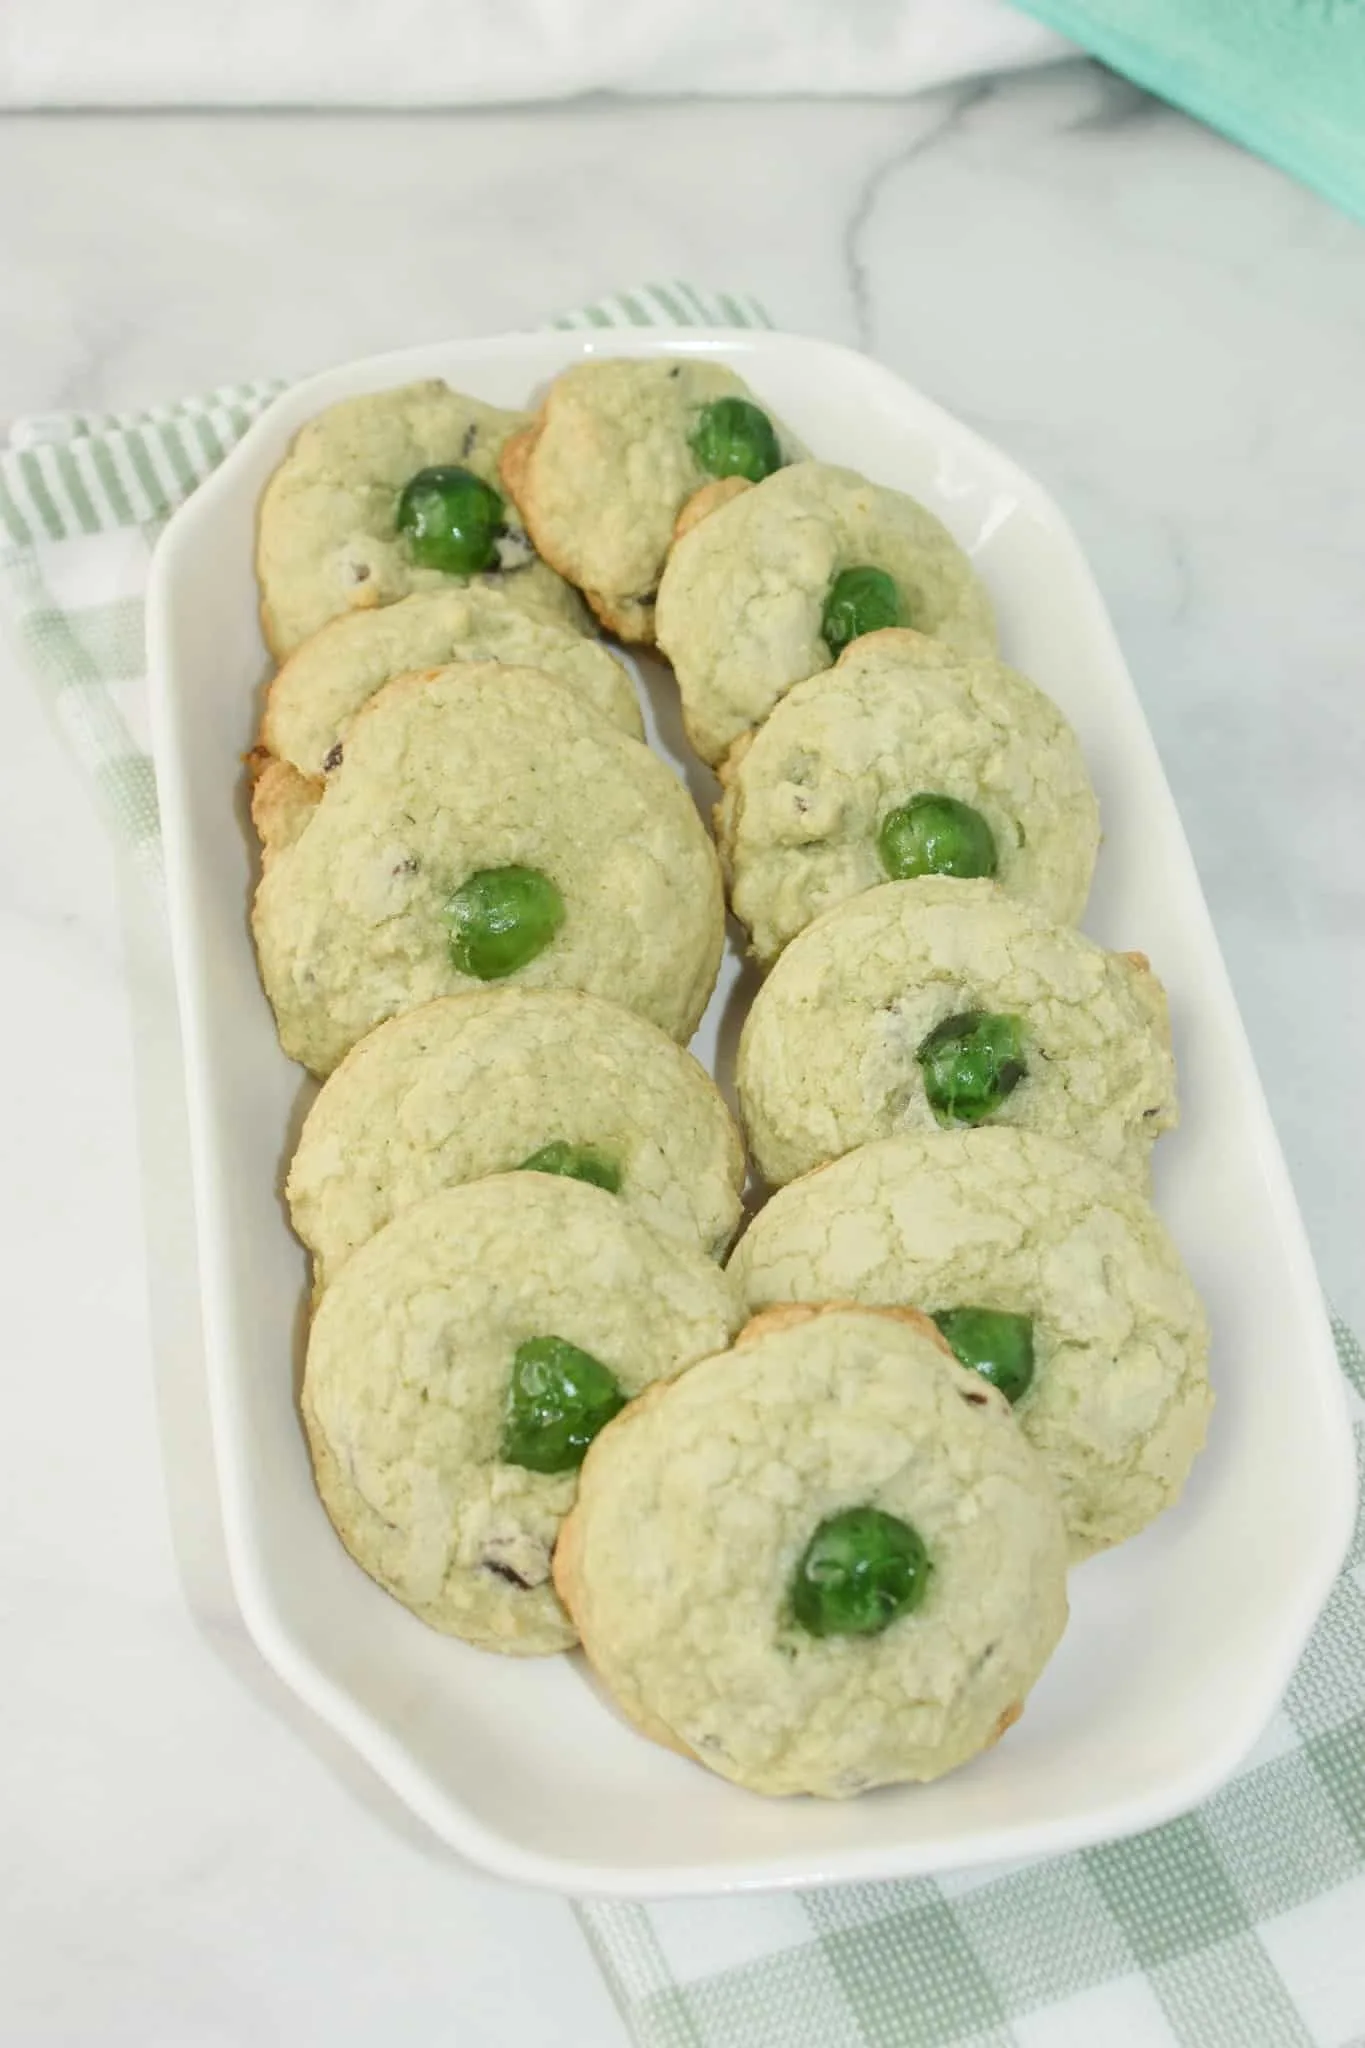 Mint Chocolate Chip Cookies are a tasty variation to traditional chocolate chip cookies.  Add some green colouring, mint chips and green cherries to give these cookies a festive flair for St. Patrick's Day or for your Holiday dessert trays!